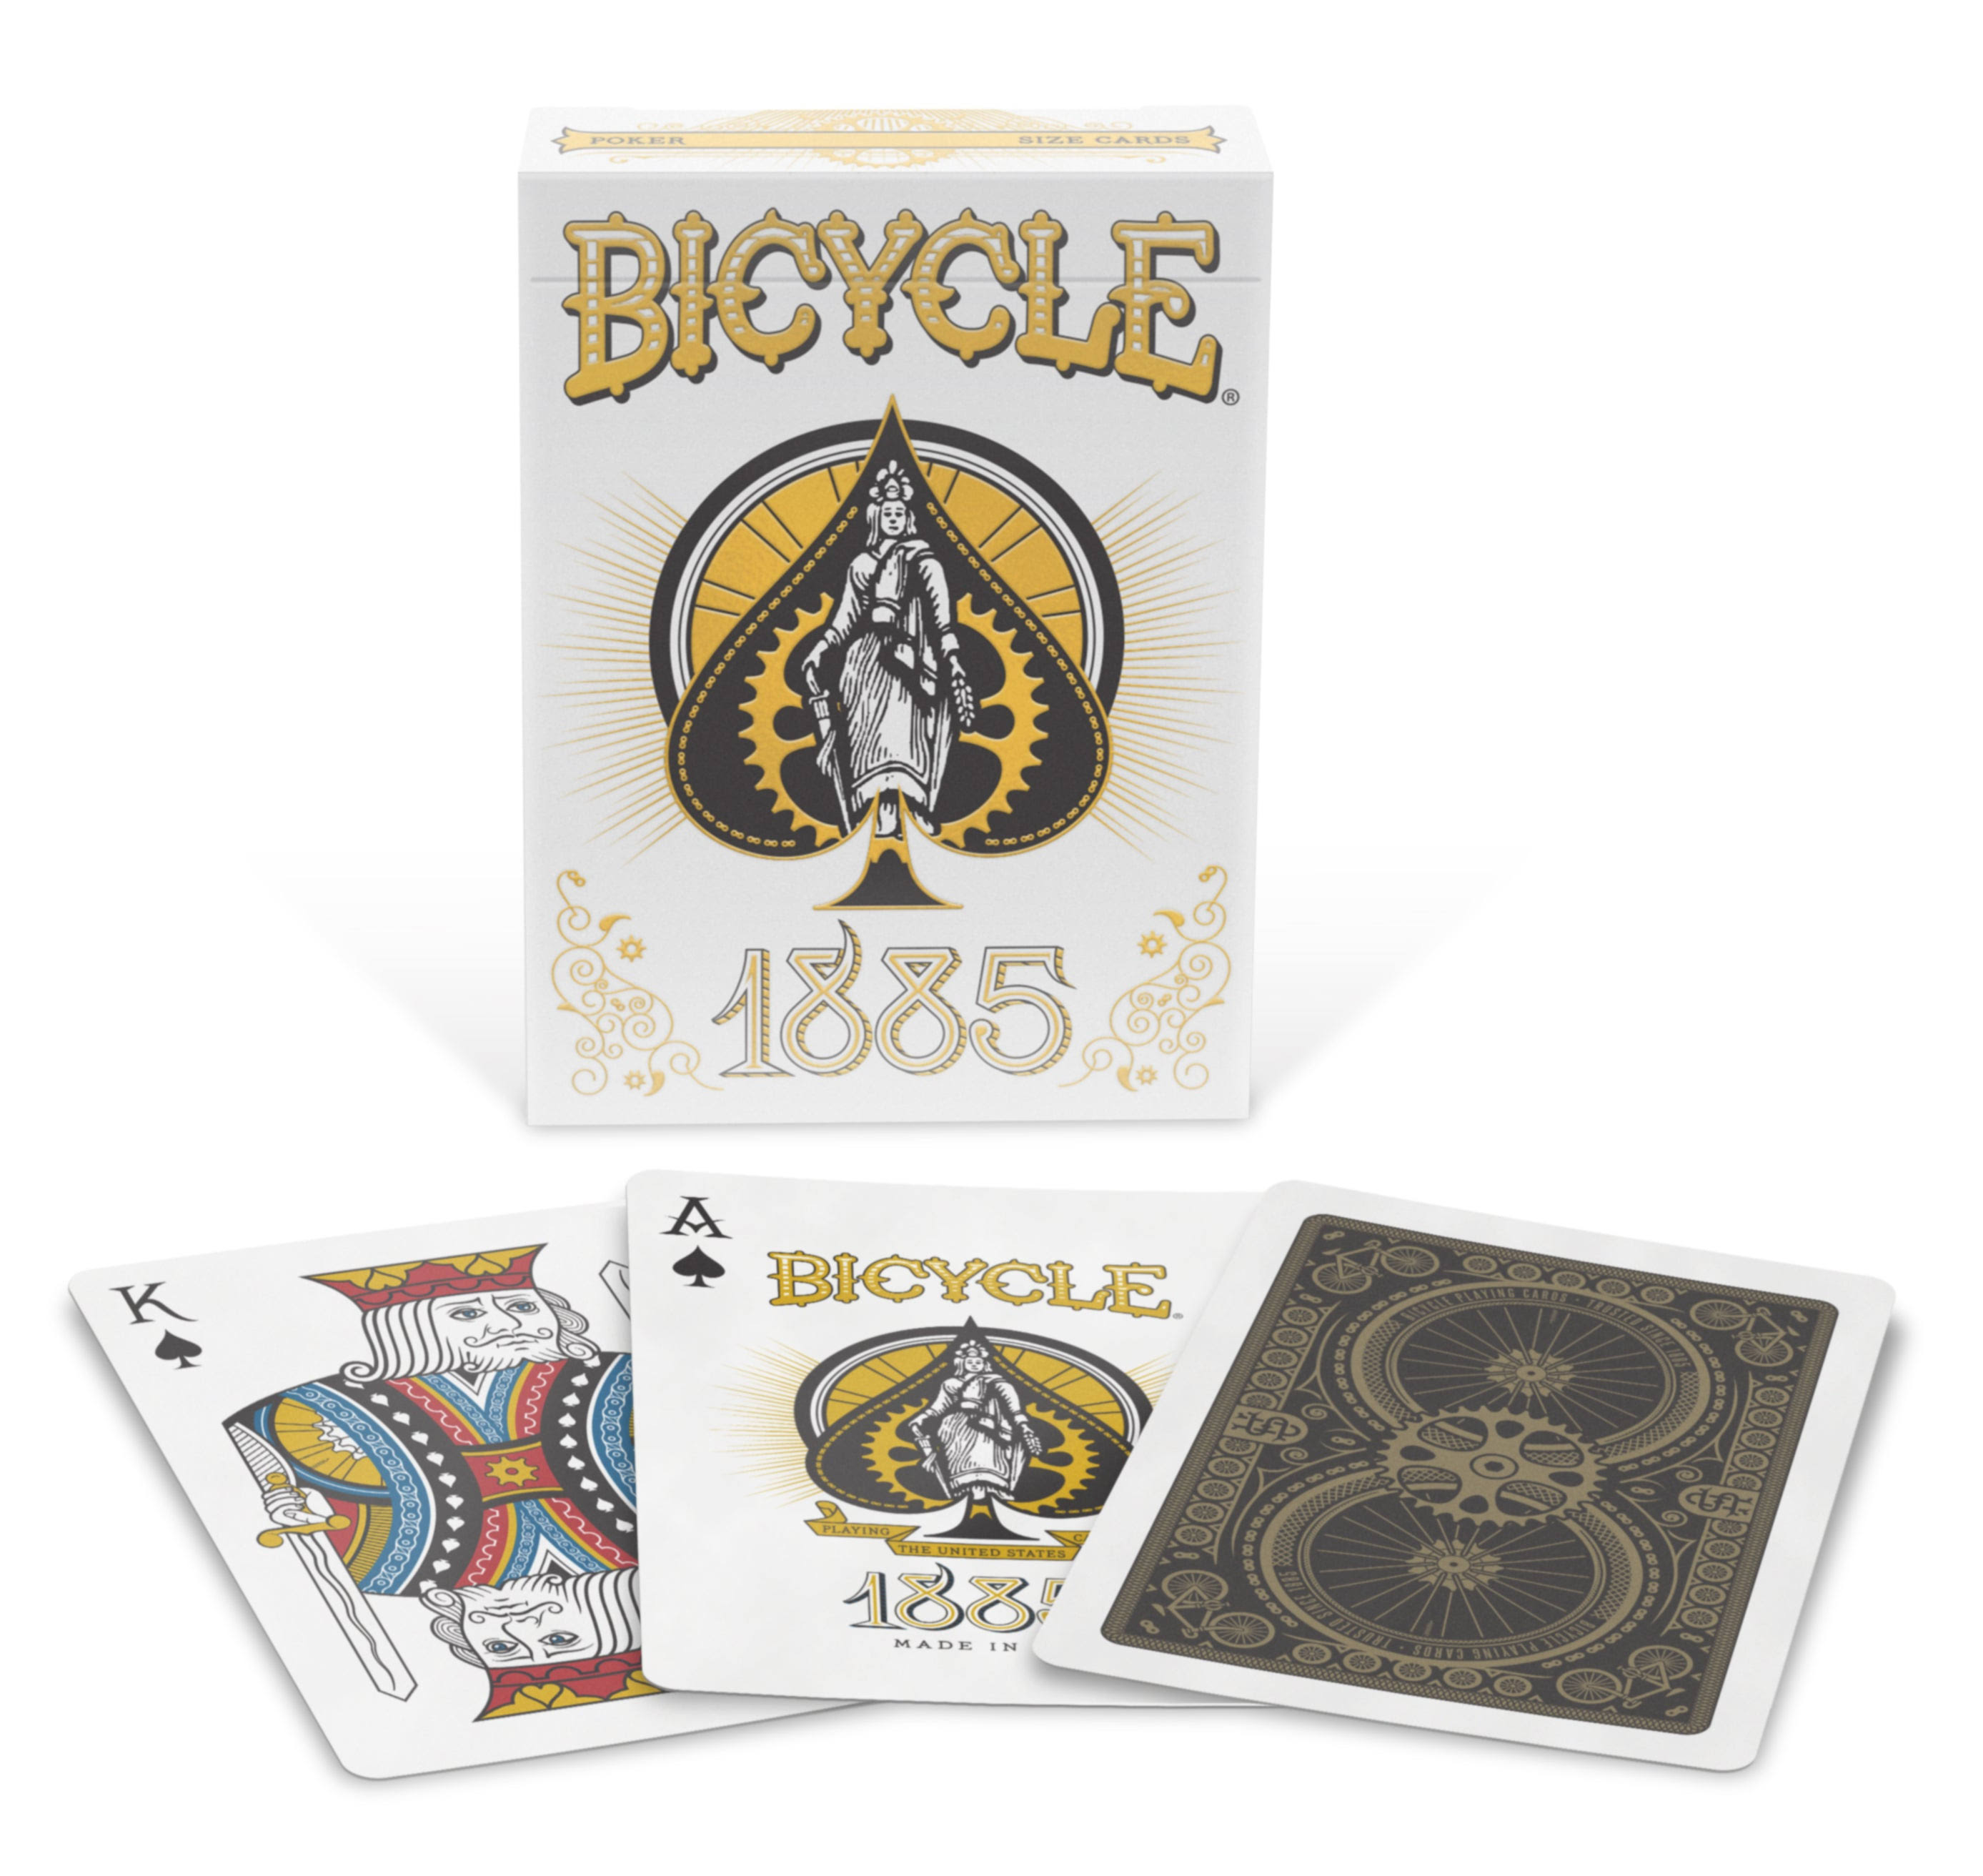 Bicycle - Playing Cards - 1885